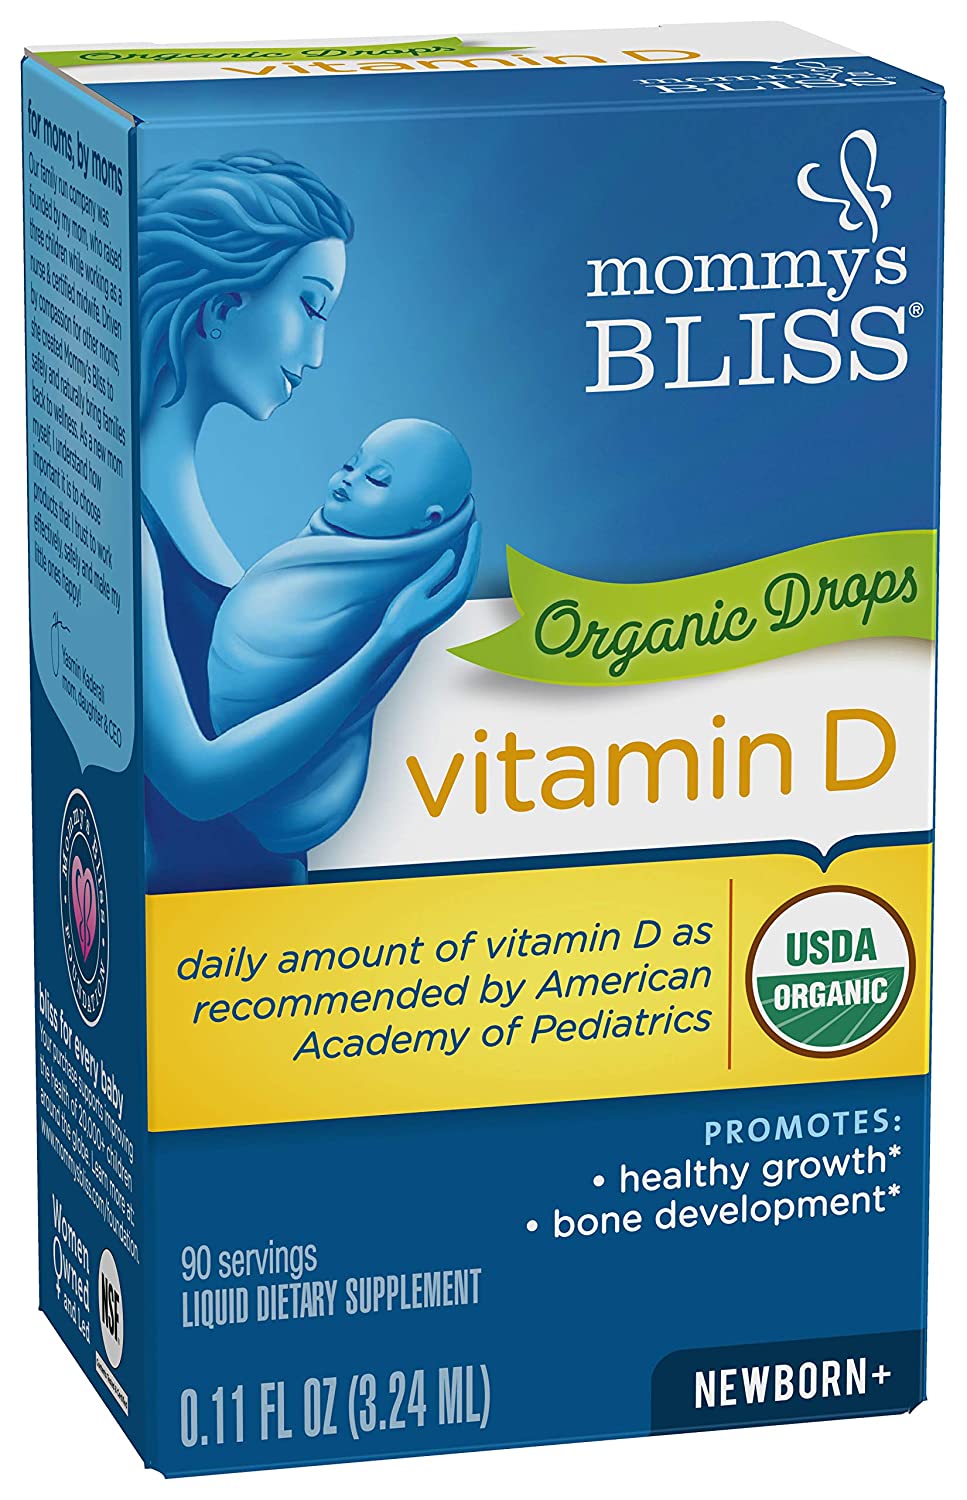 Mommy's Bliss Baby Vitamin D Organic Drops - Healthy Growth and Bone Development 